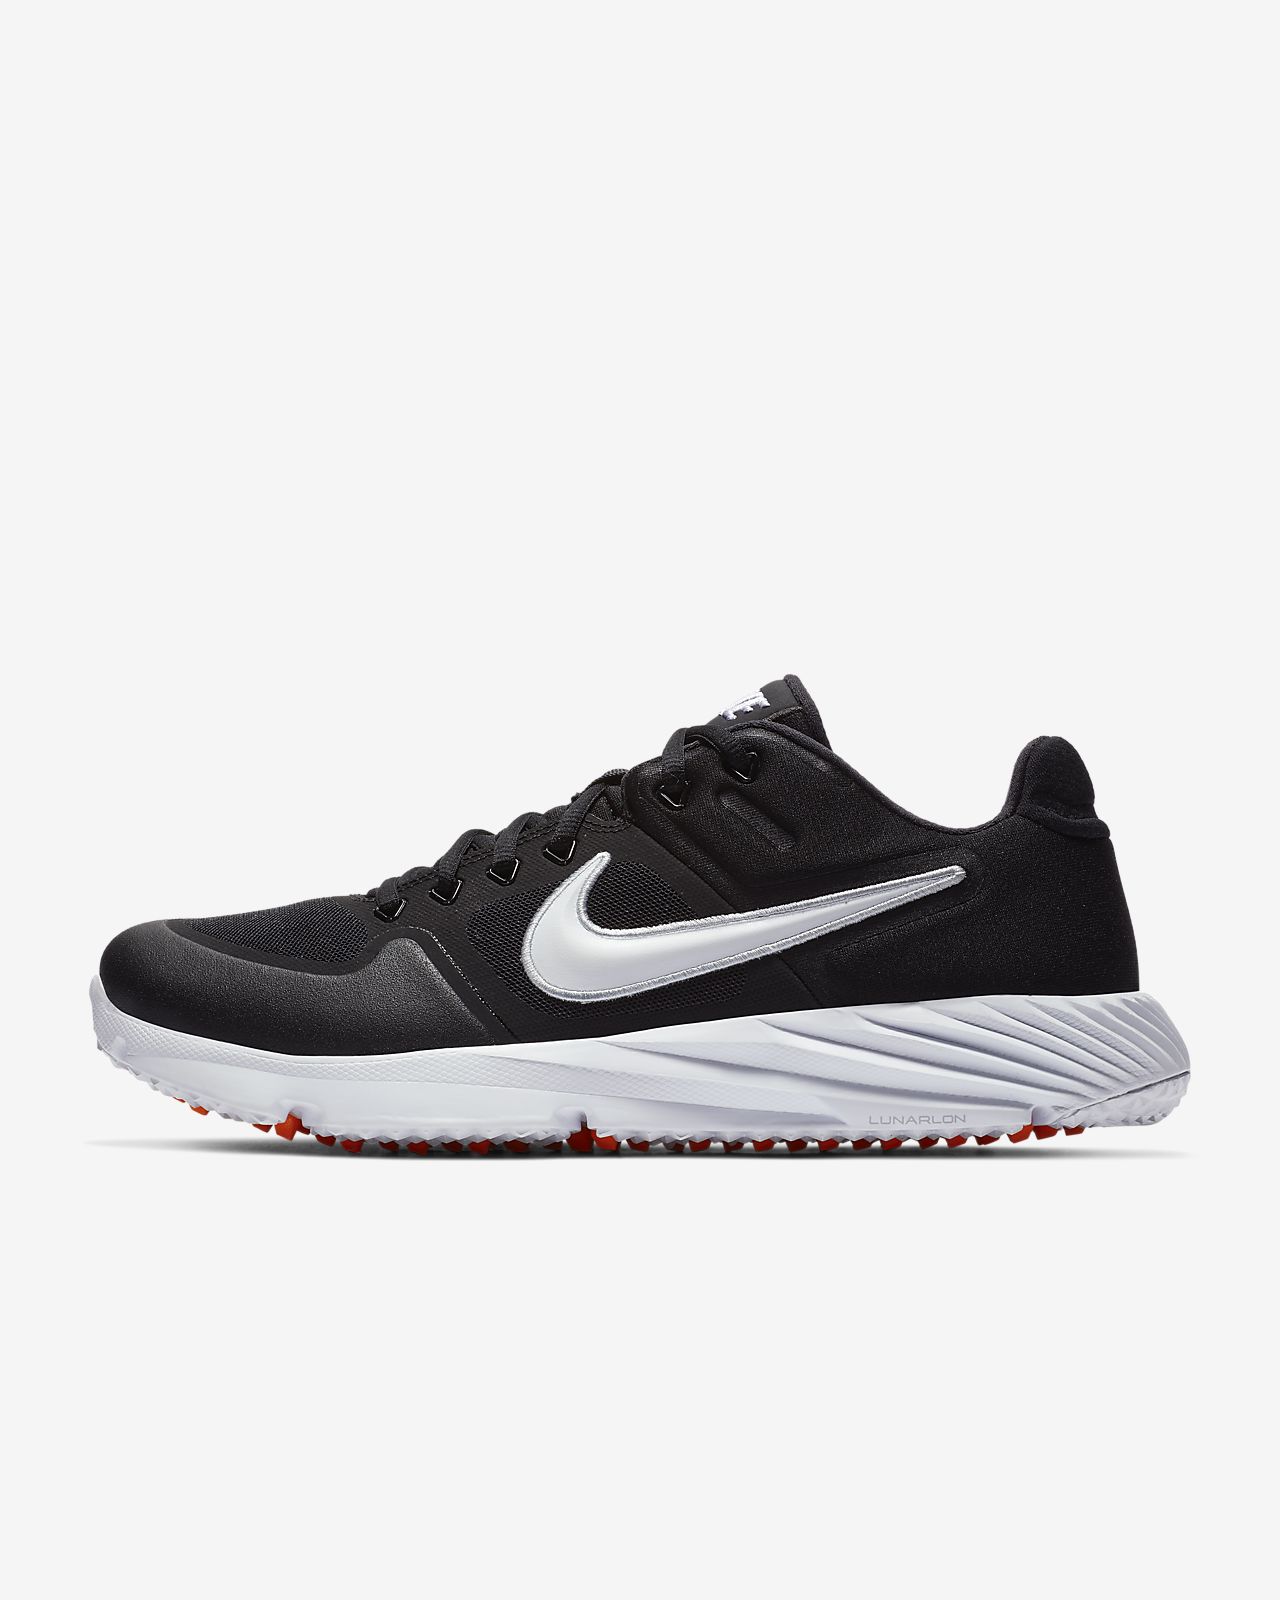 nike turf shoes Online Shopping for 